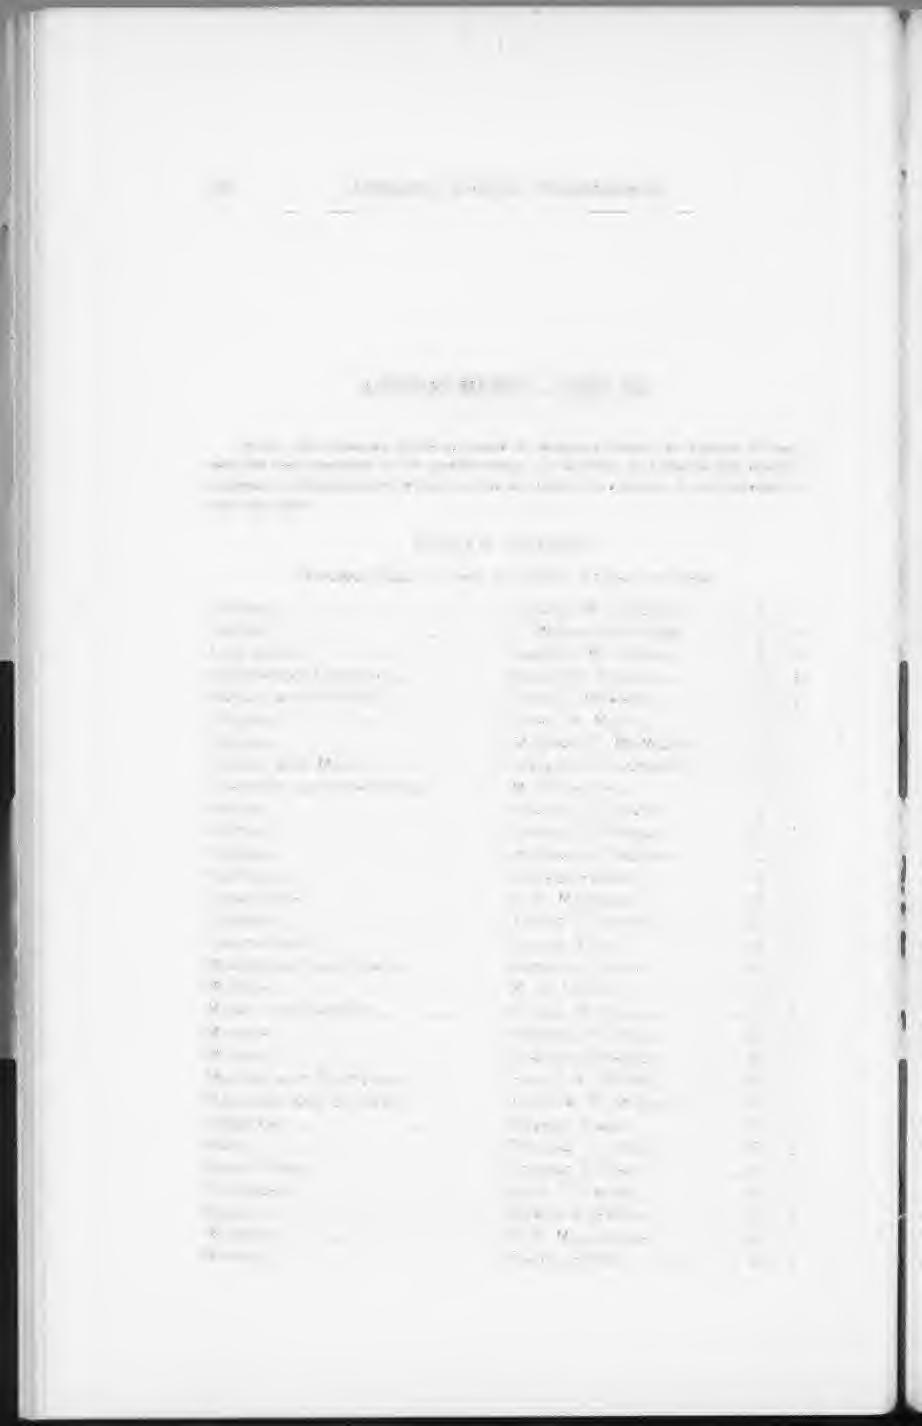 48 Detrot Annual Conference, h APPONTMENTS 892-93. Note. The numerals followng names of mnsters denote the number of years each has been apponted to hs present charge.